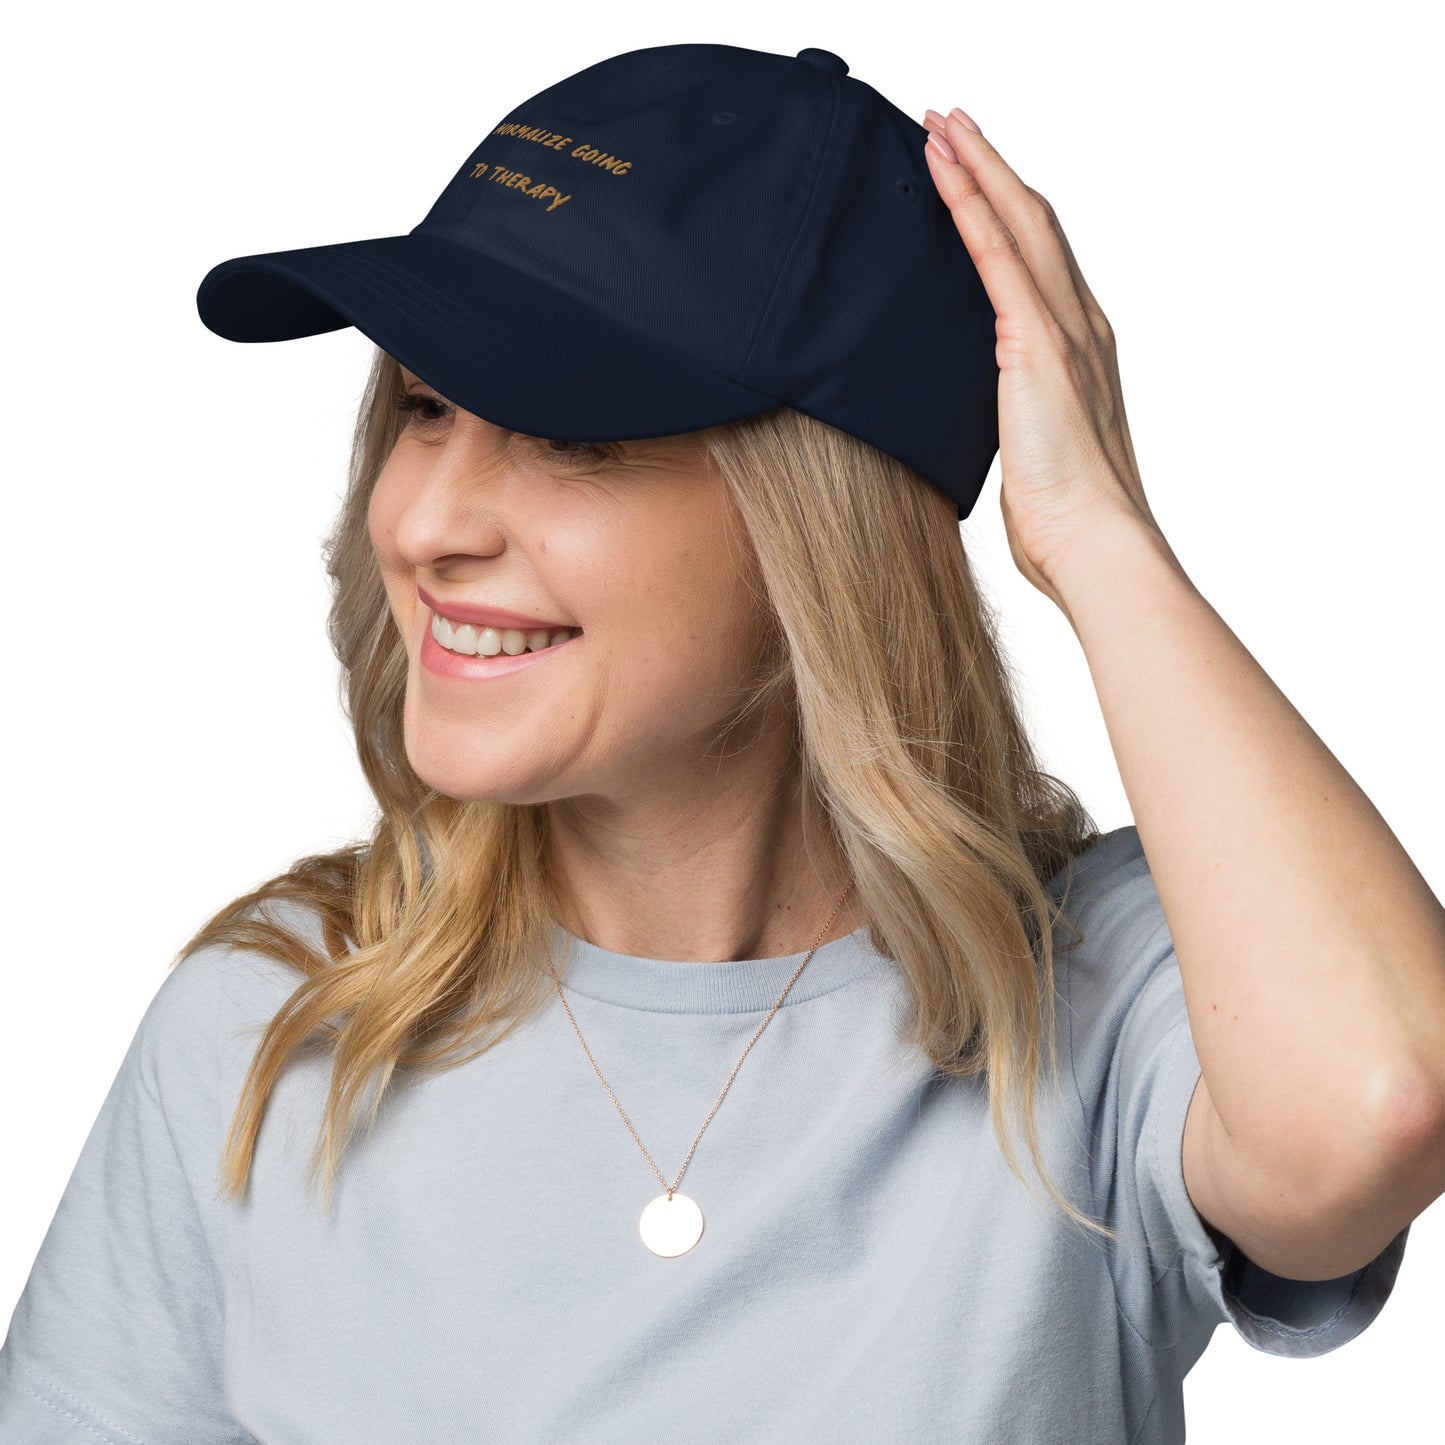 Normalize Going To Therapy Embroidered Unisex Cap